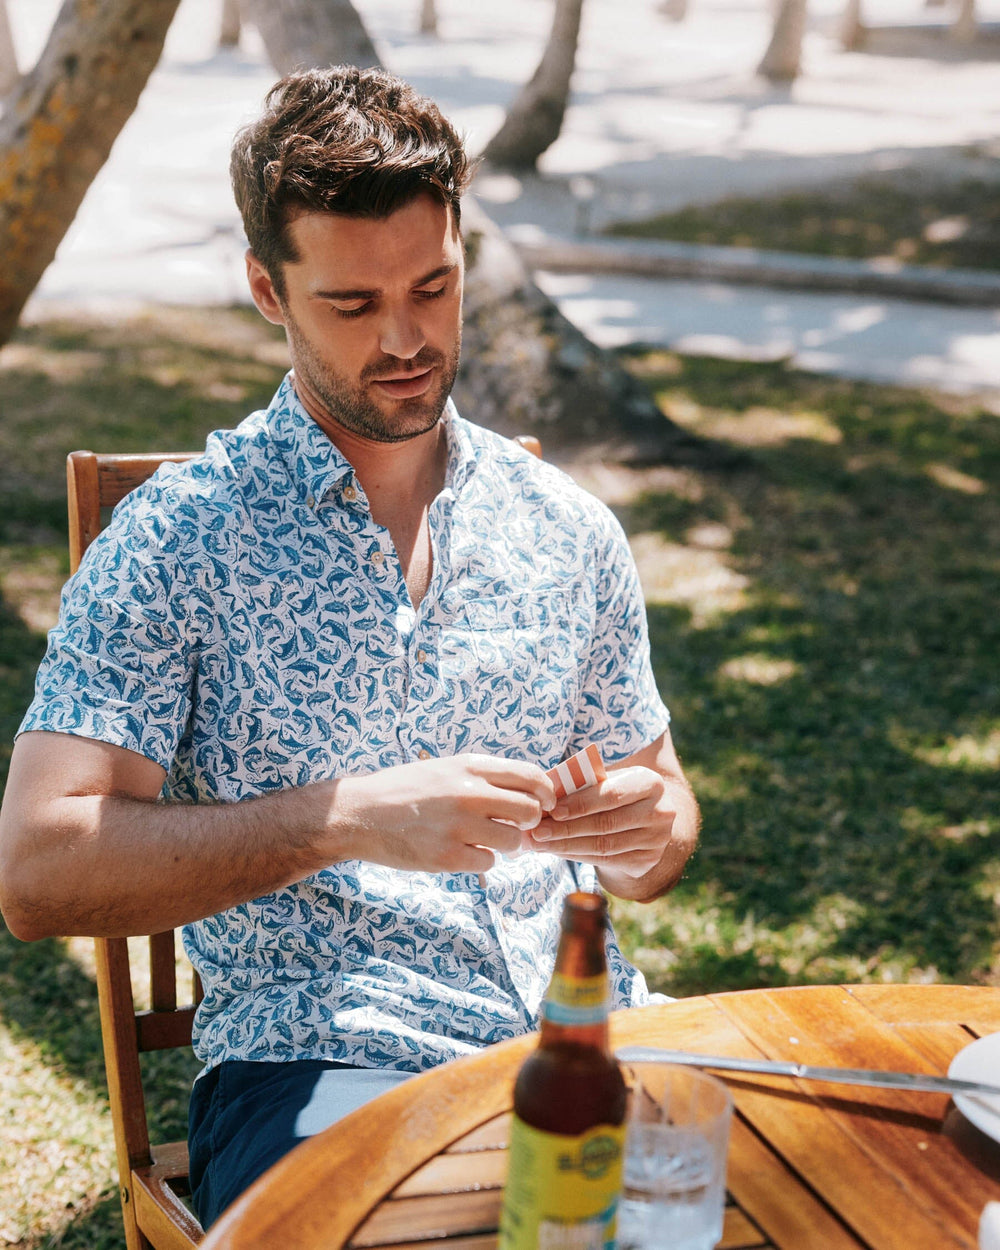 The lifestyle view of the Southern Tide Catch You Later Short Sleeve Long Sleeve Button Down Sport Shirt by Southern Tide - Clearwater Blue